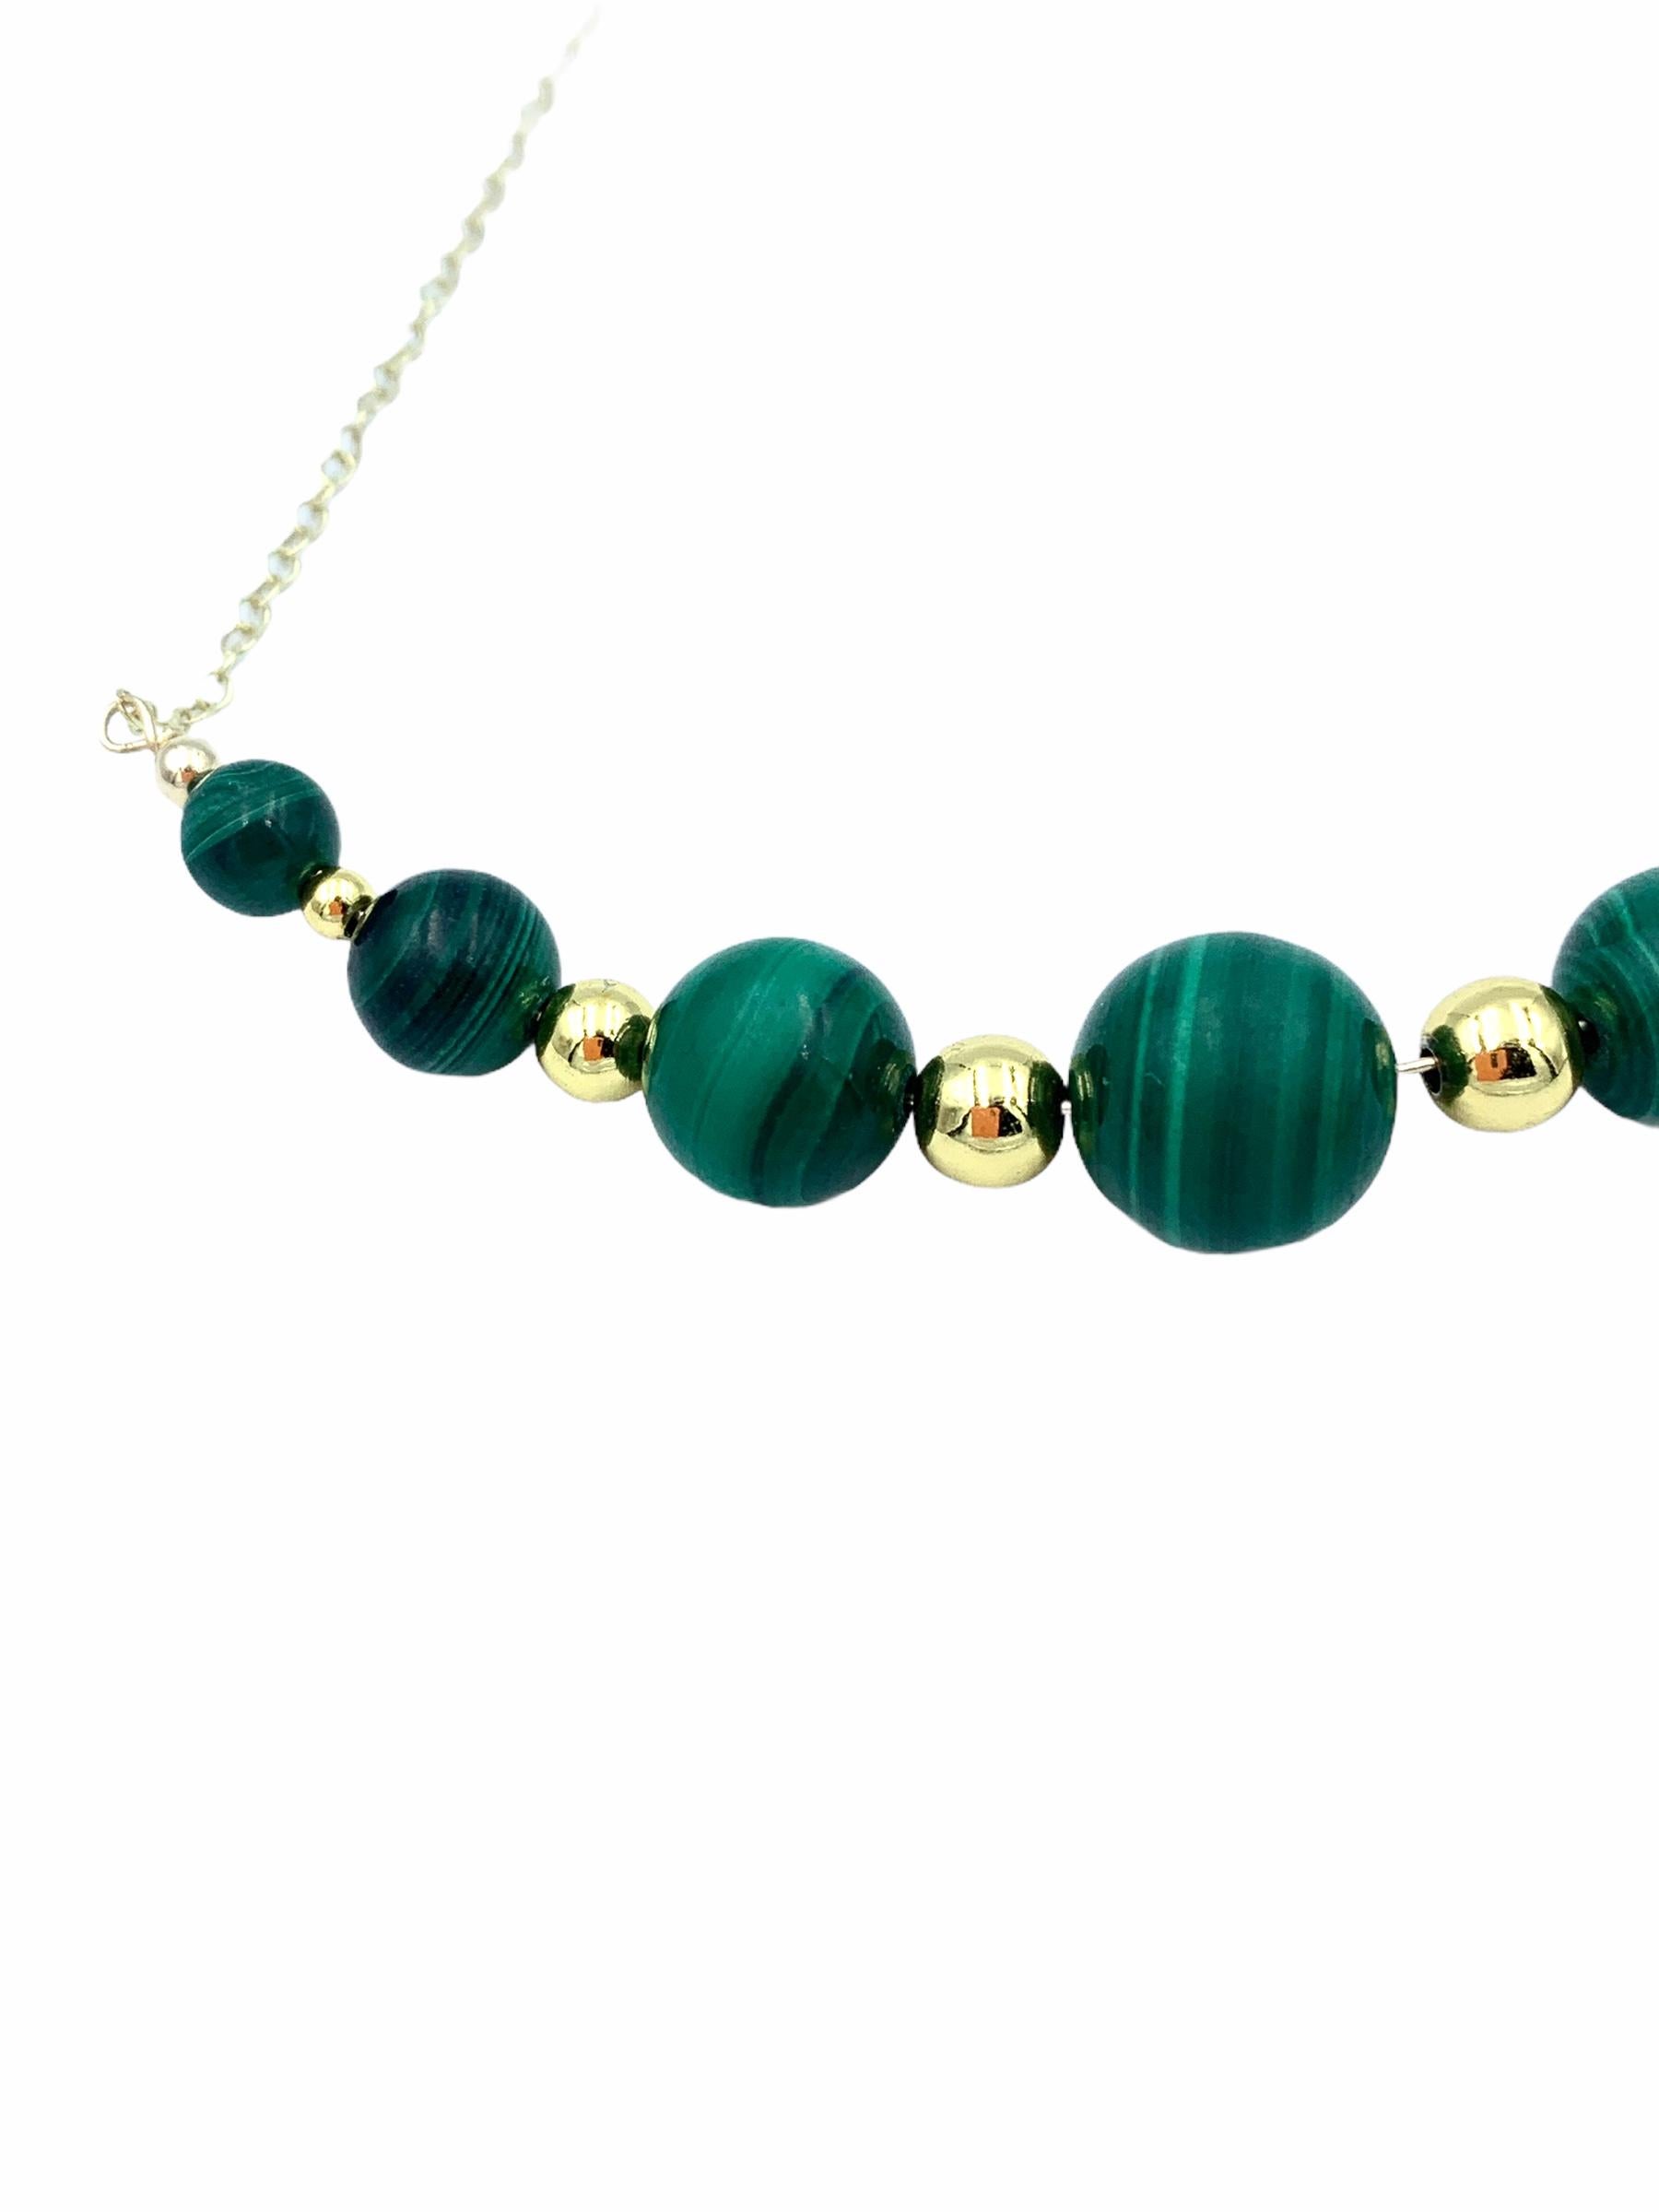 Hand made using 9 carat Yellow Gold, the suspended Malachite beads are threaded together with a solid gold wire and graduated onto a delicate 1.7 mm cable chain. The lovely green swirls of the centre bead is 12 mm in size, 10mm the two following, 8